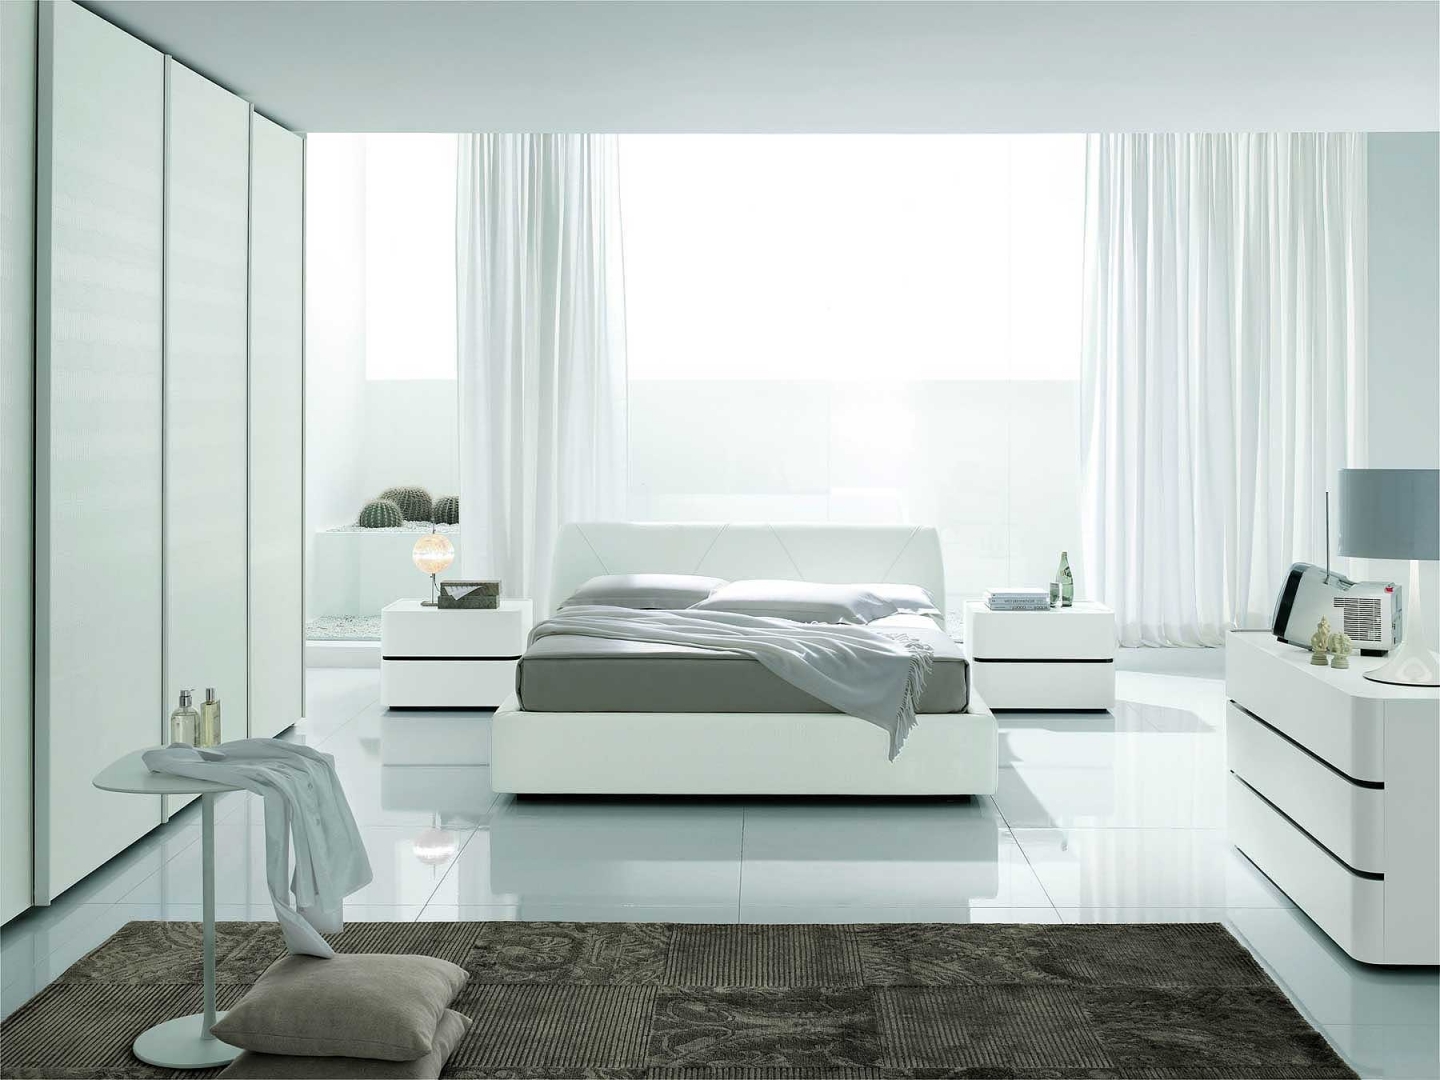 Modern Bedroom Bedroom Amazing Modern Bedroom With White Bedroom Furniture Of Platform Bed Also Twin Nightstand And Drawers Completed With Closet And Pedestal Table Bedroom 15 Simple White Bedroom Furniture For Your Romantic Modern House